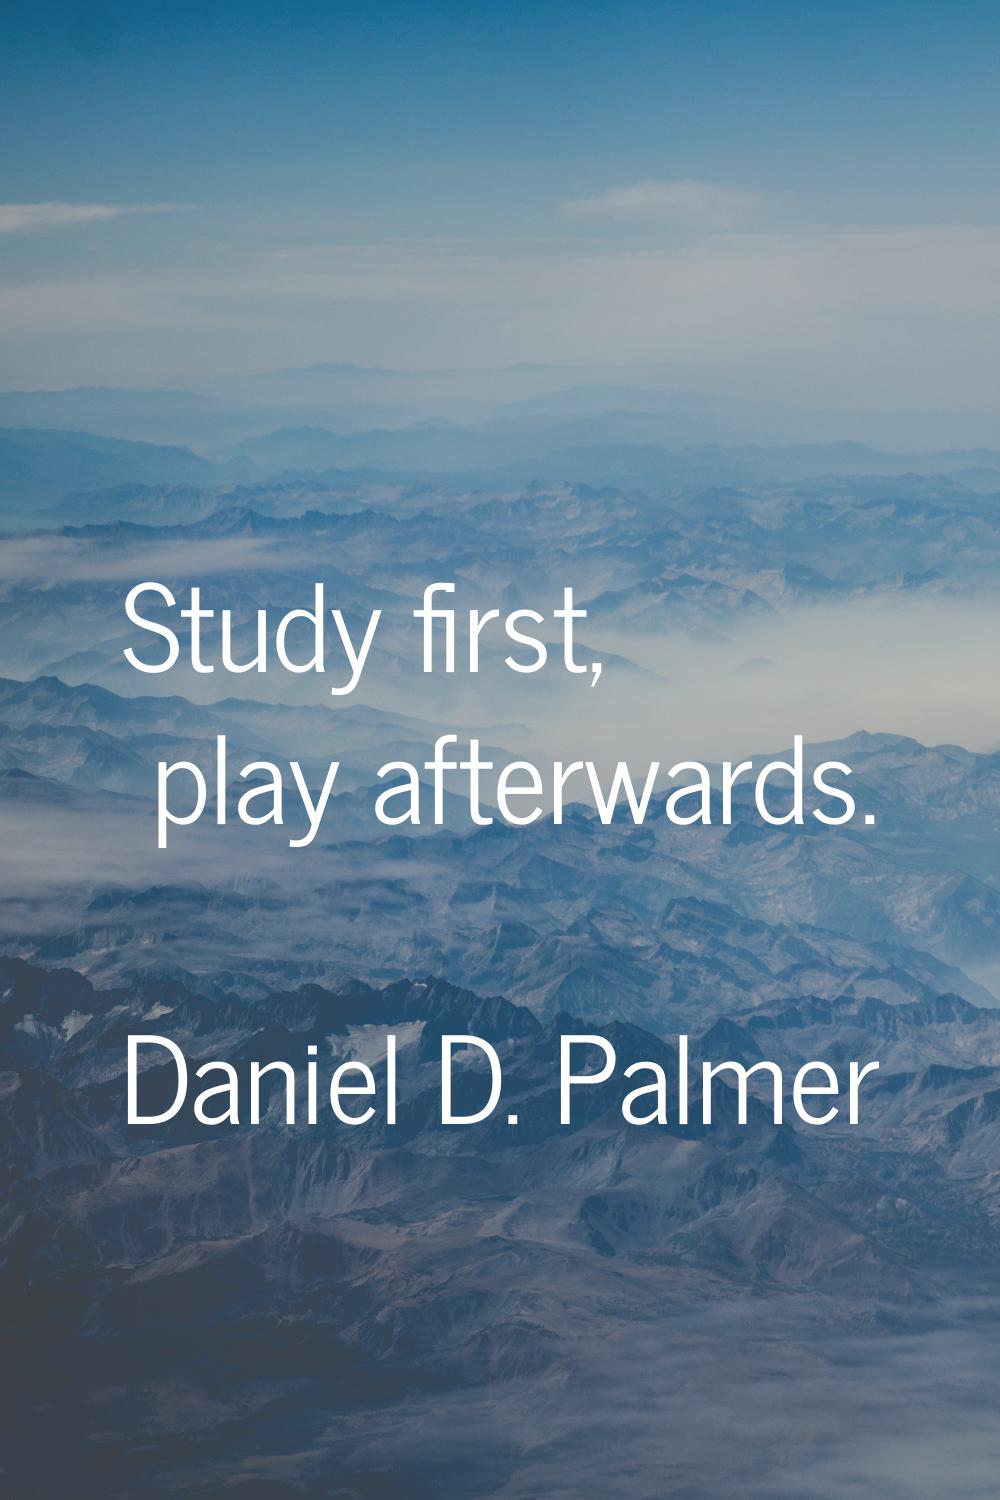 Study first, play afterwards.